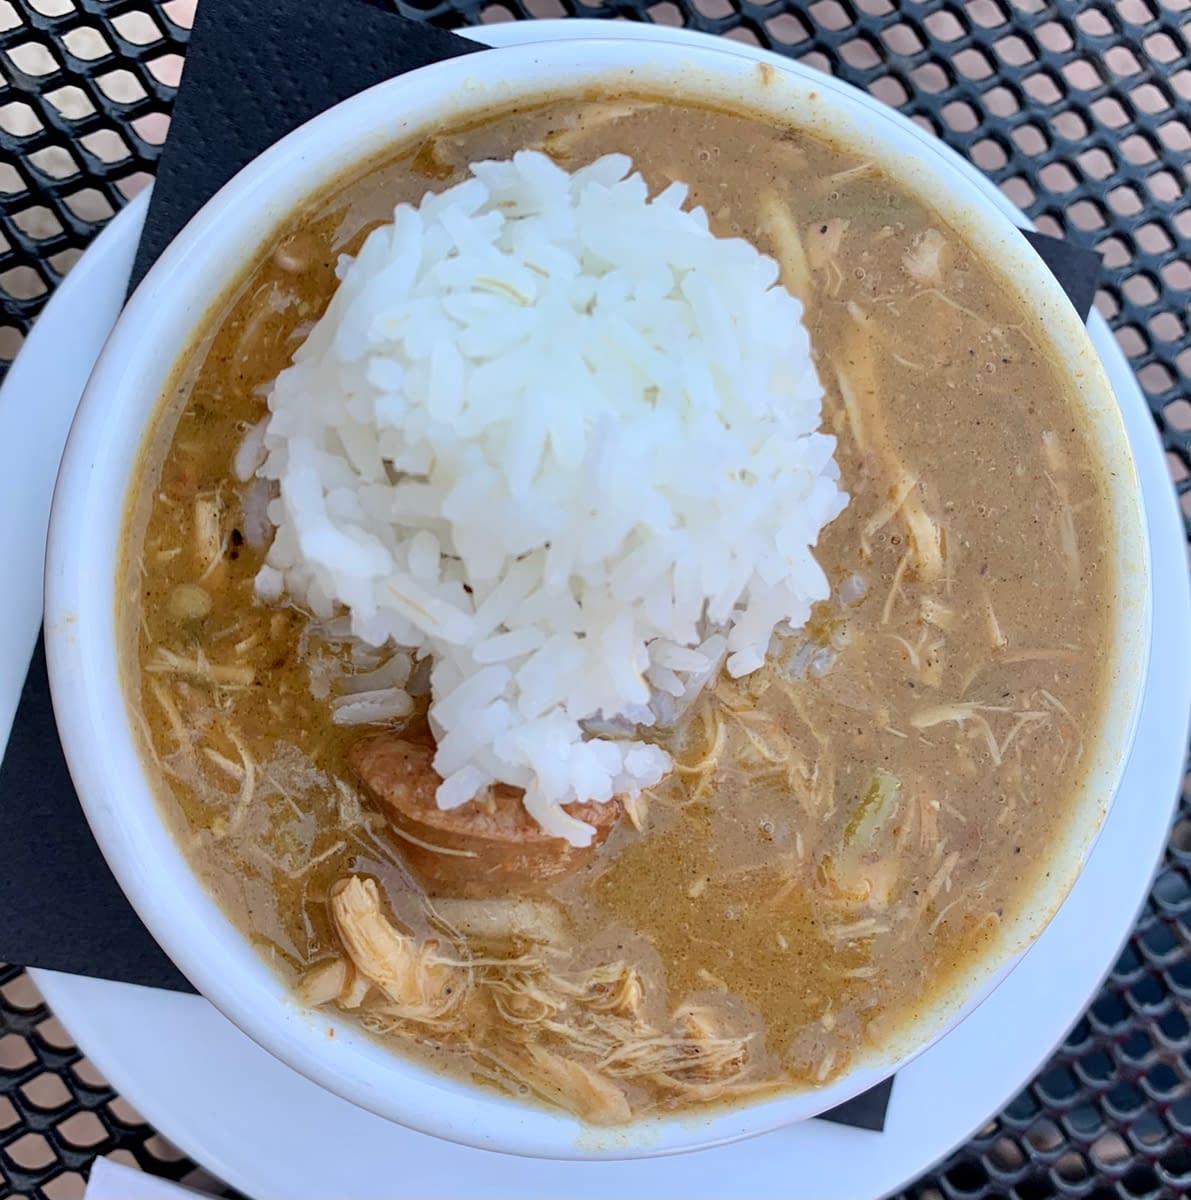 The gumbo at Localz Bistro in Sandy Utah.  Localz Bistro is one my new favorite places to get food in 2020